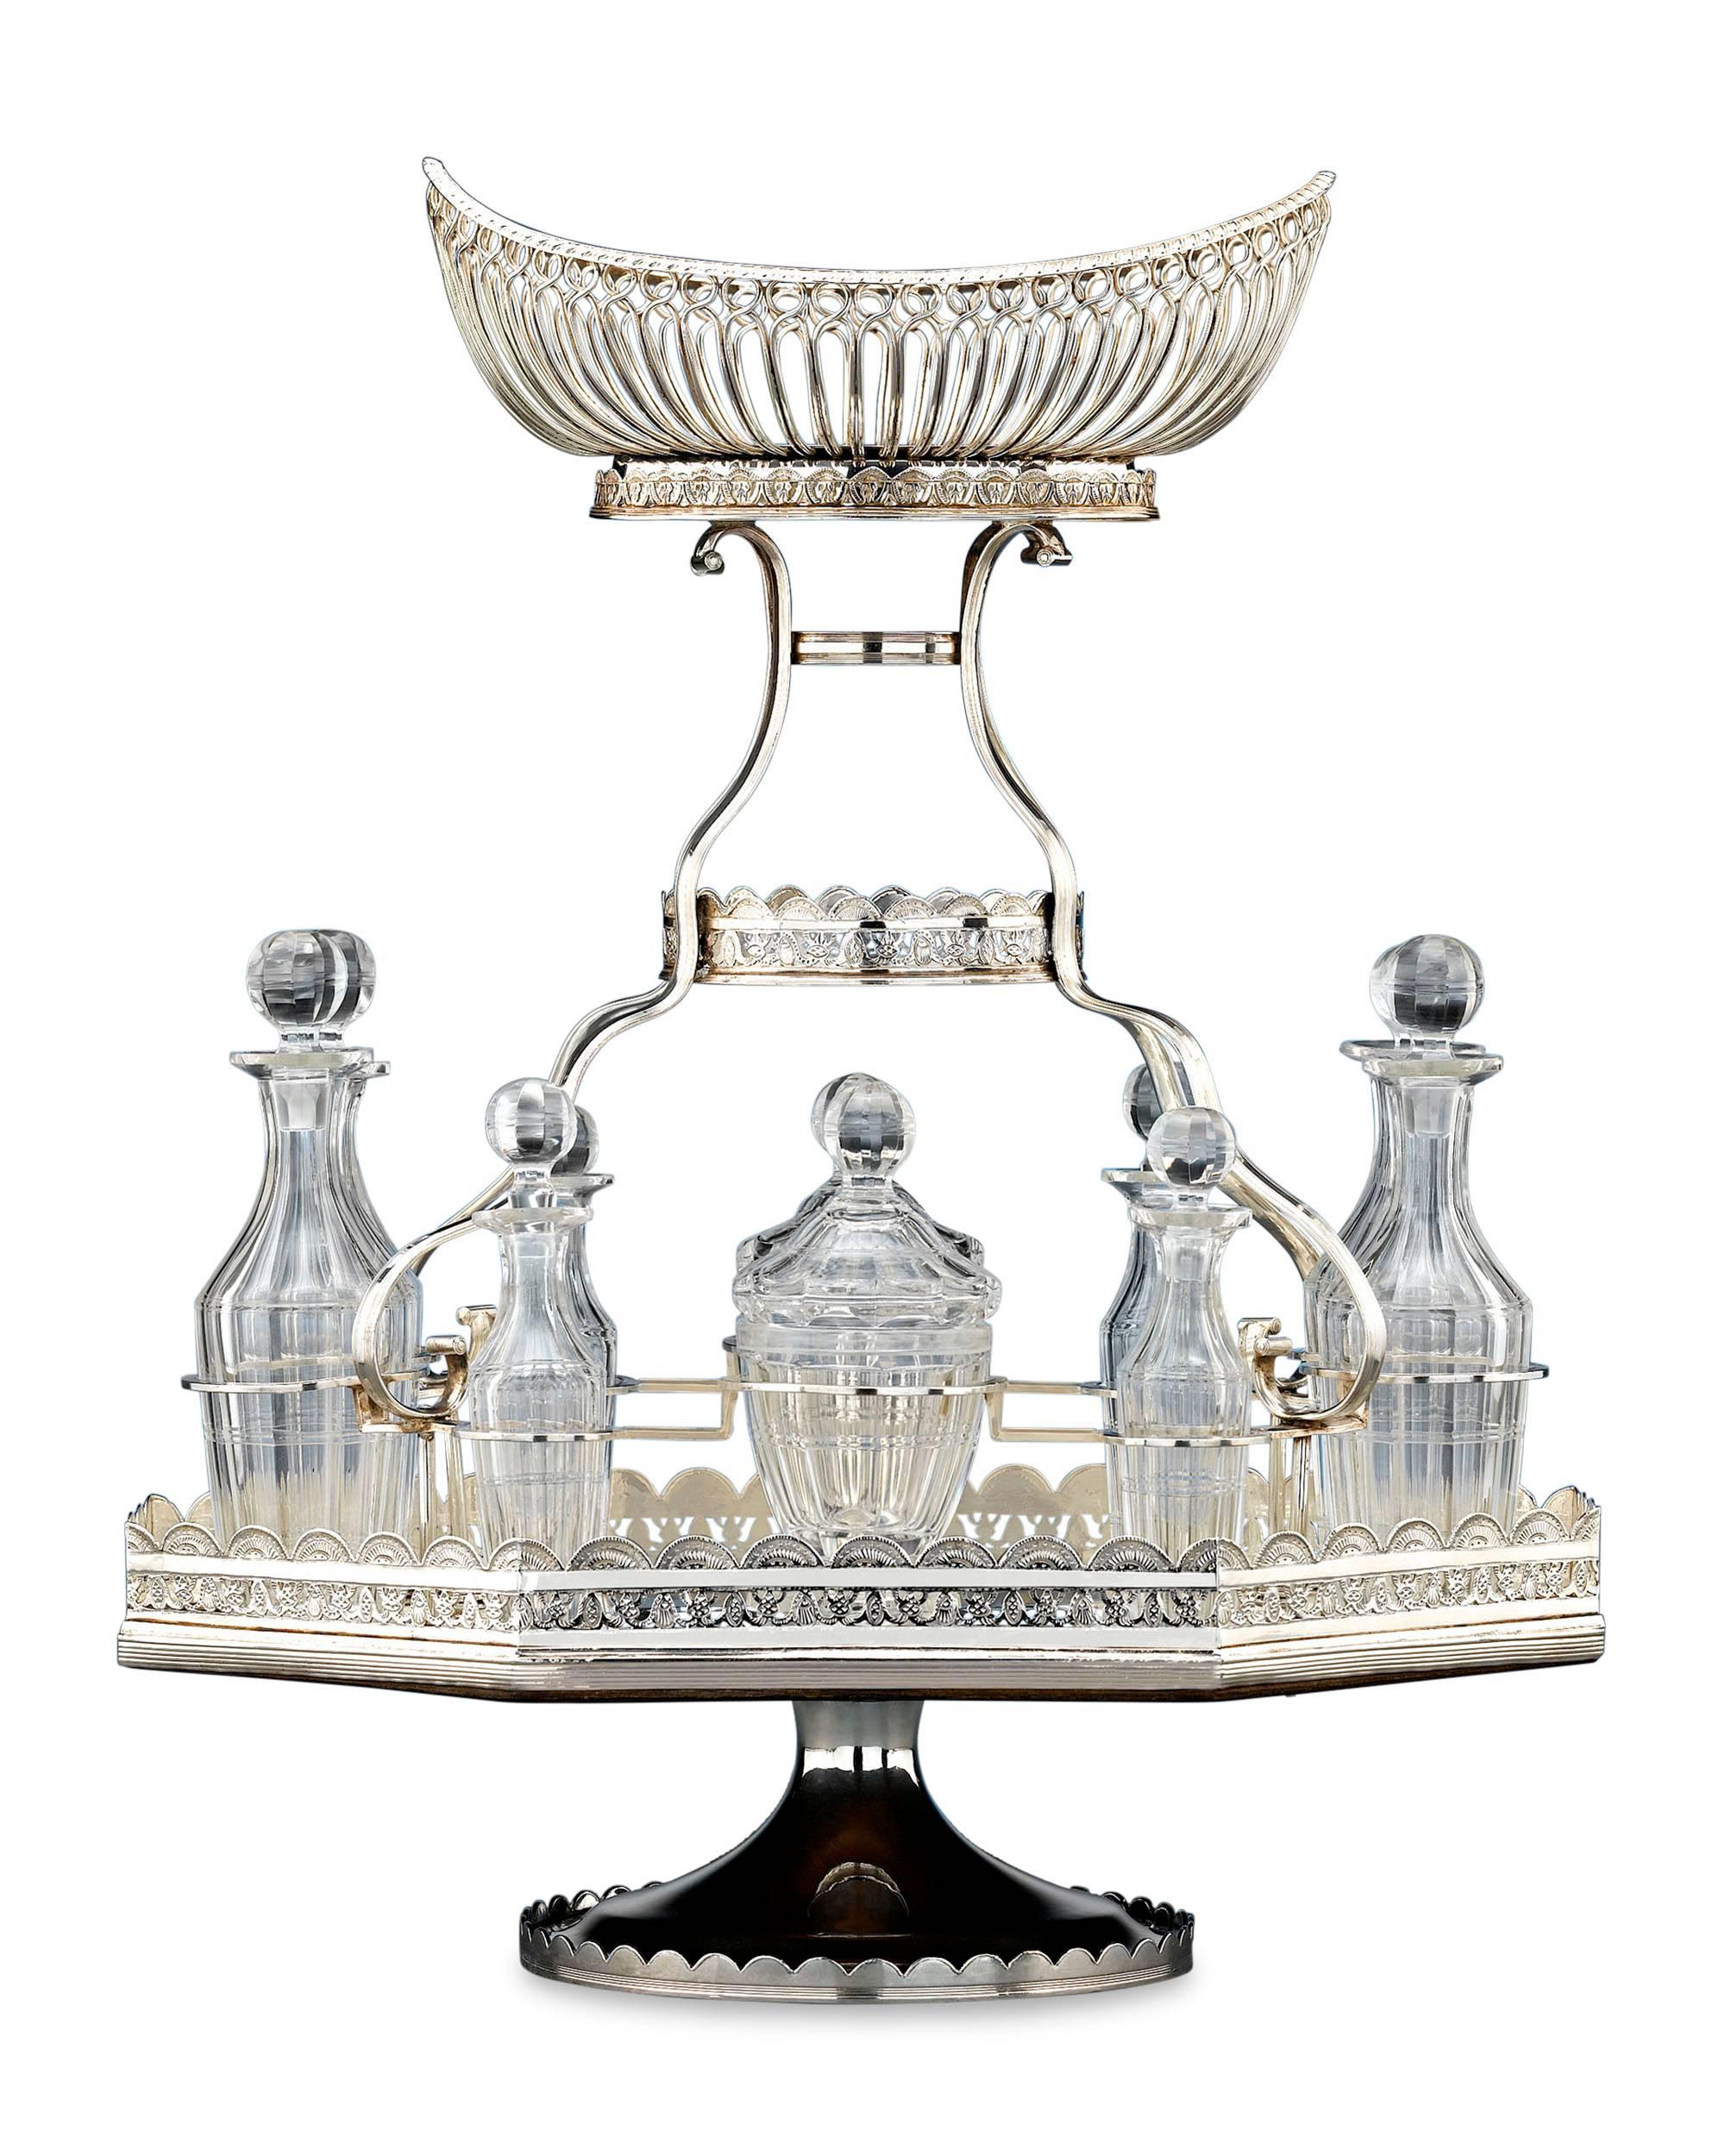 This elegant silver plate epergne is a rarity in that it also includes a full, cut-glass cruet set. This service’s delicate central basket is elevated above a plateau holding ten finely-cut bottles, including two mustard pots, four small